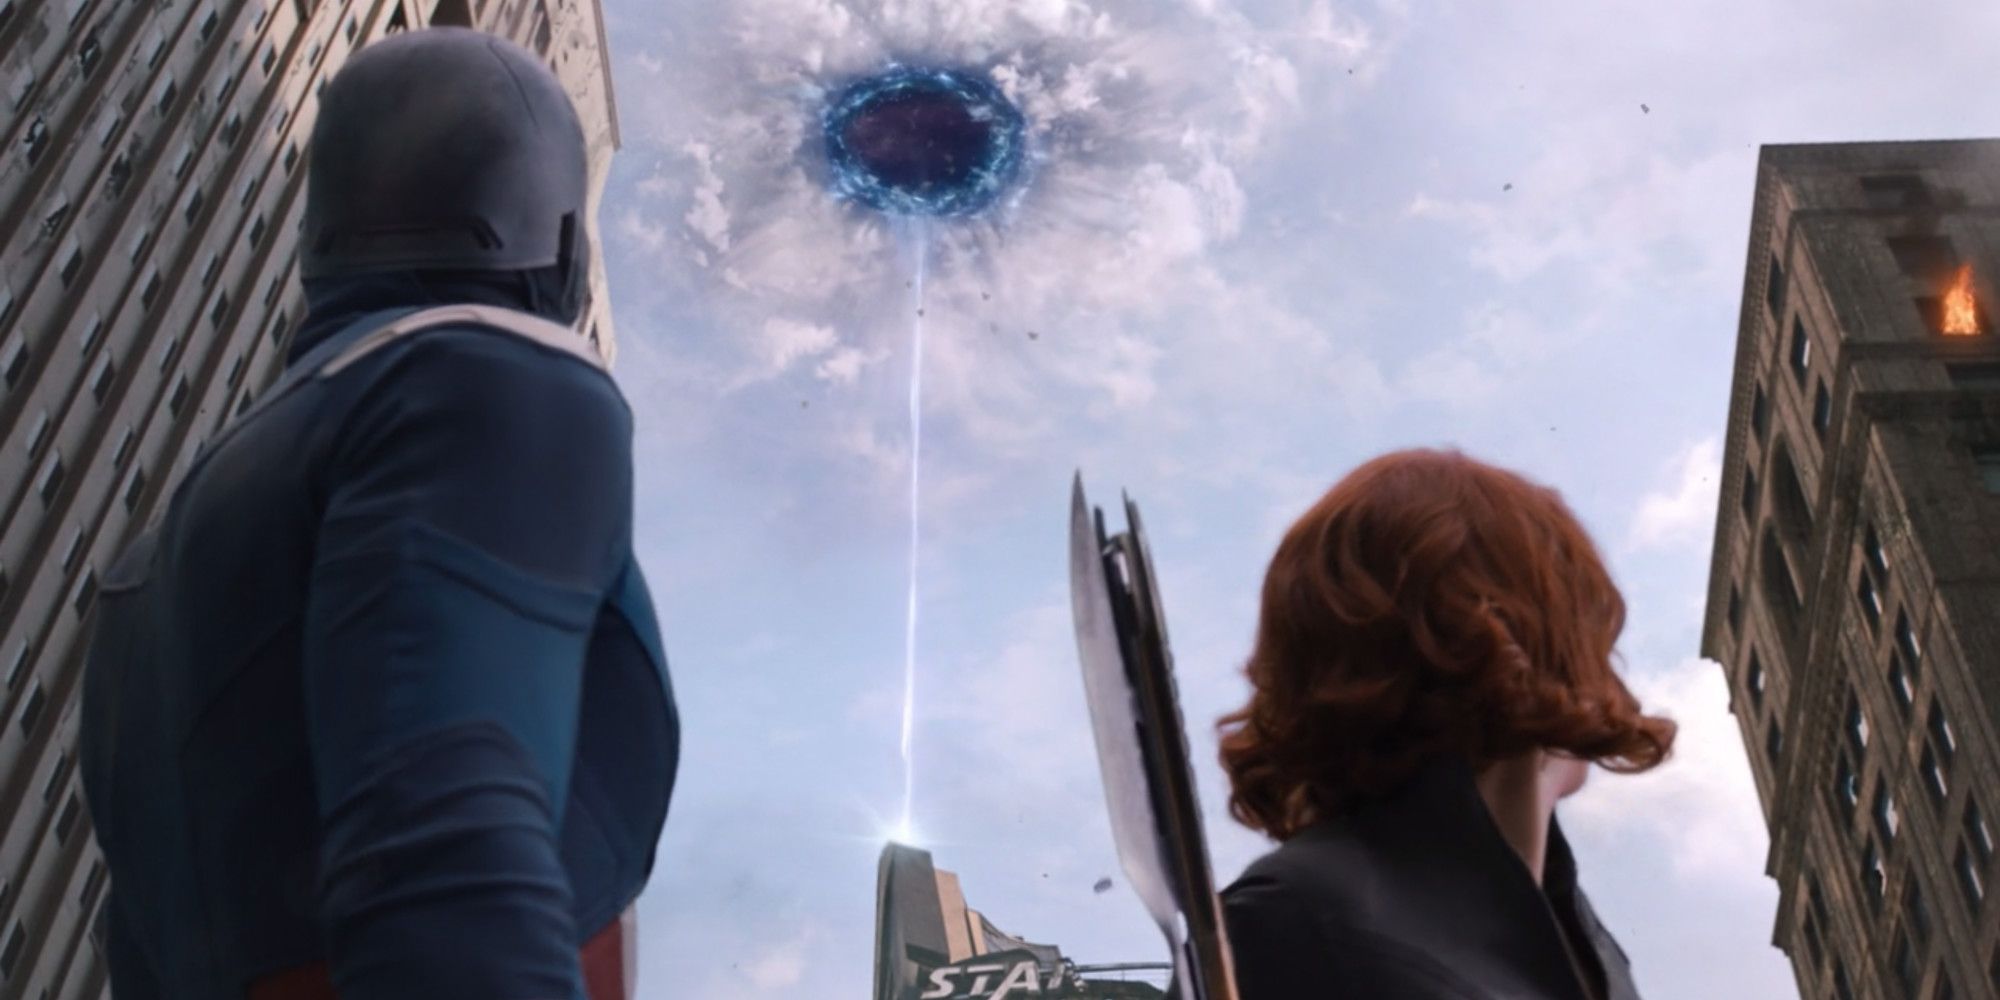 All 7 Times Earth Has Been Invaded In The MCU